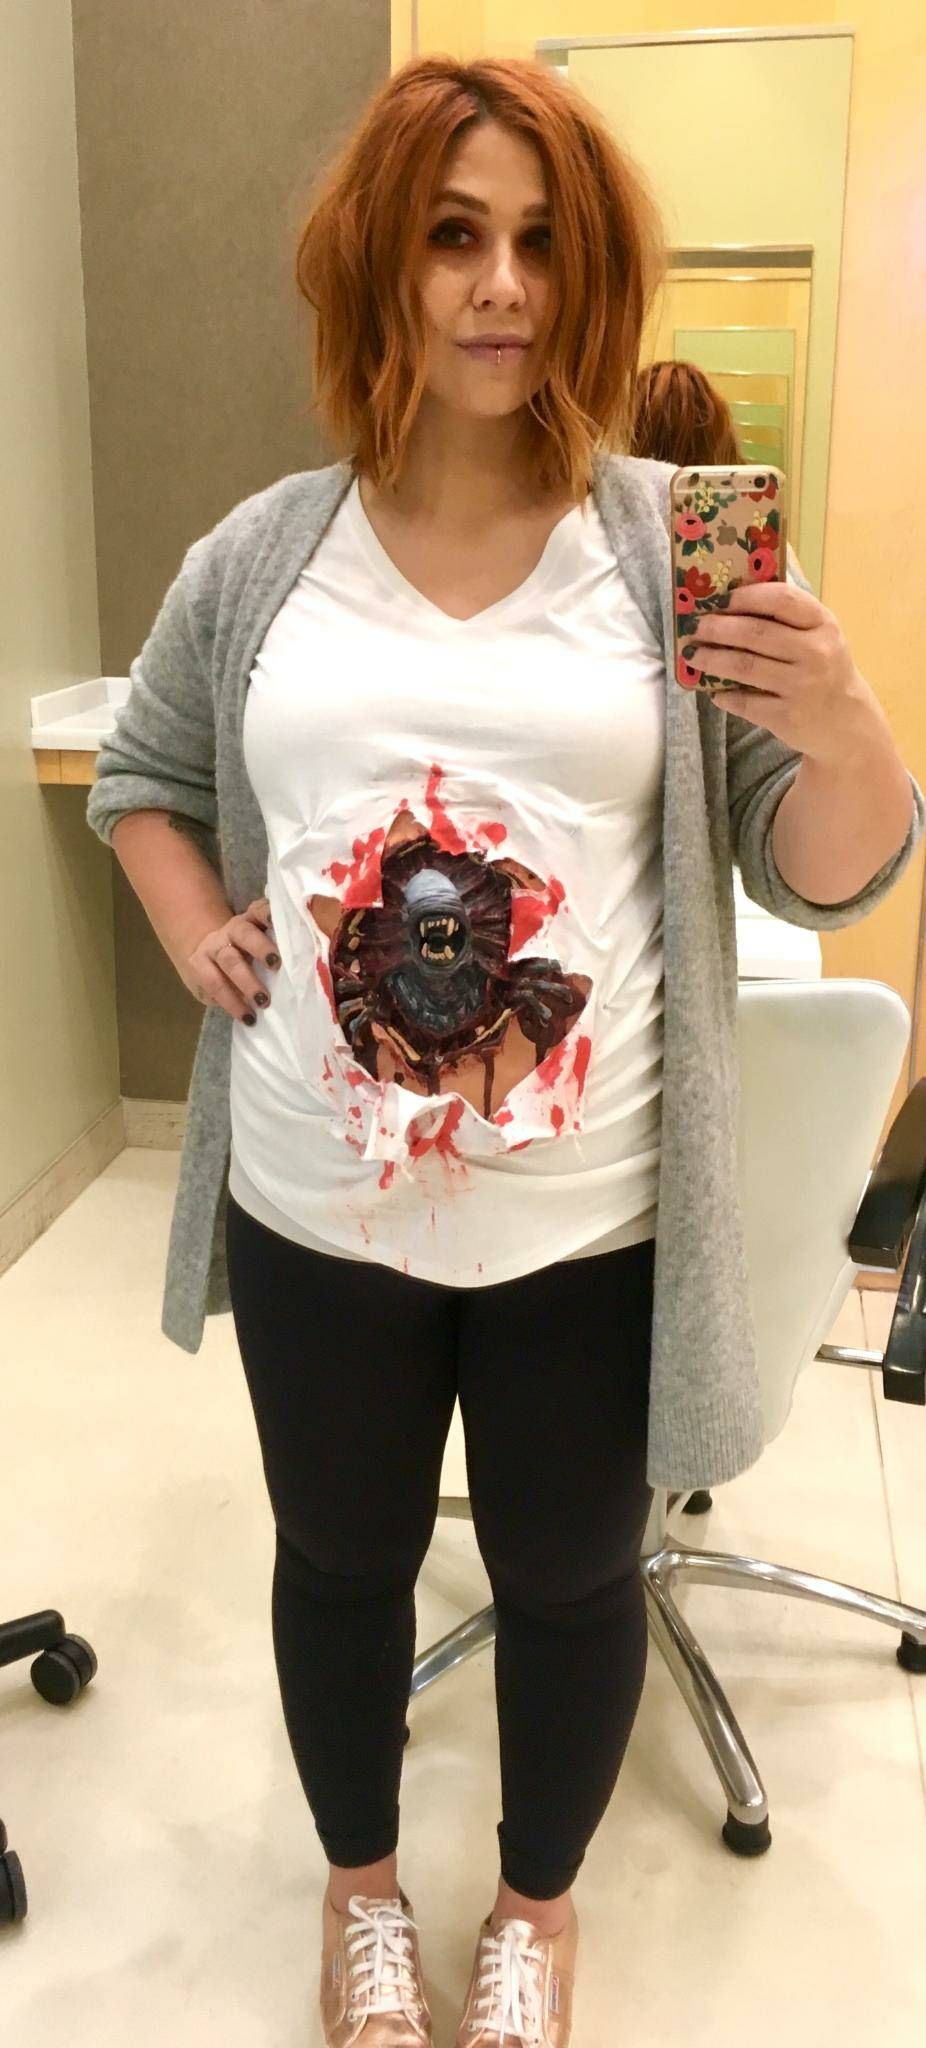 My pregnant wife went all out for Halloween!